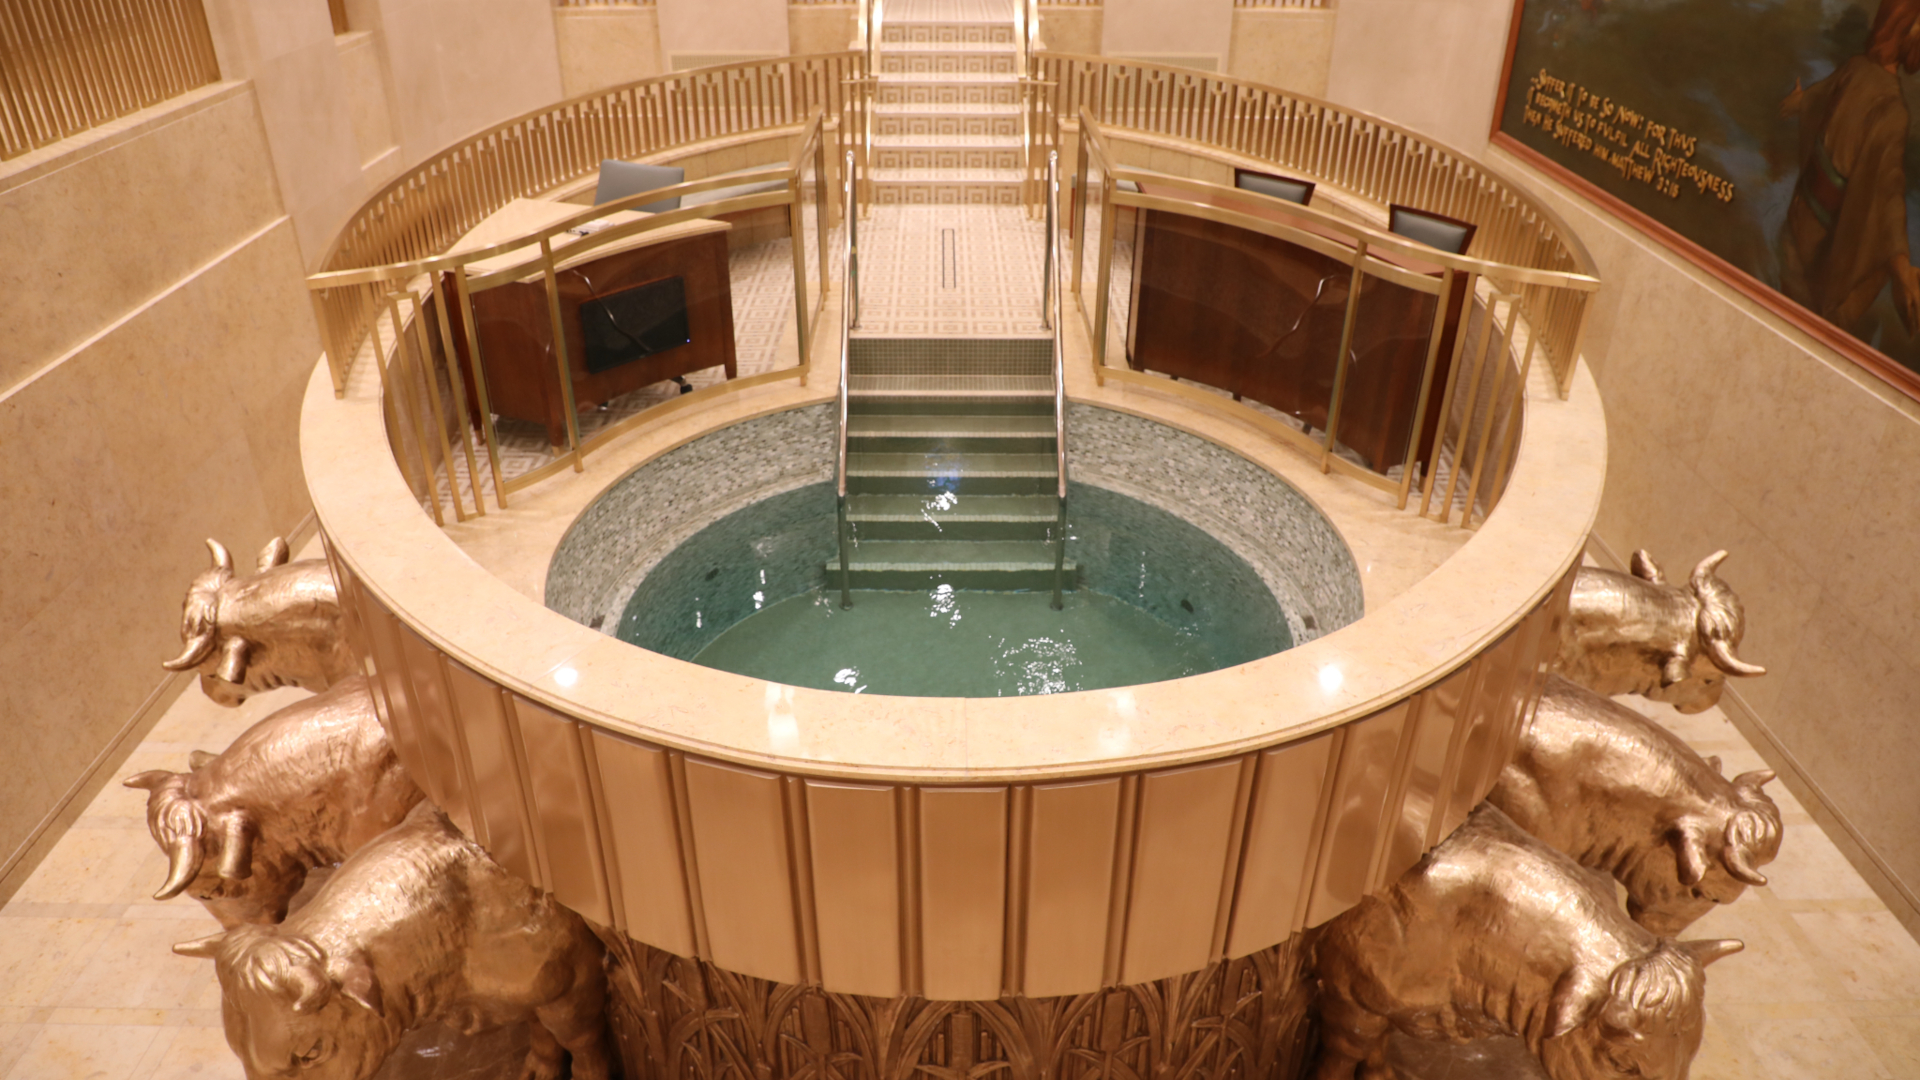 The baptistry of the Hamilton, New Zealand Temple. Baptisms for the dead are performed by proxy in temples all over the world. Image courtesy of The Church of Jesus Christ of Latter-day Saints